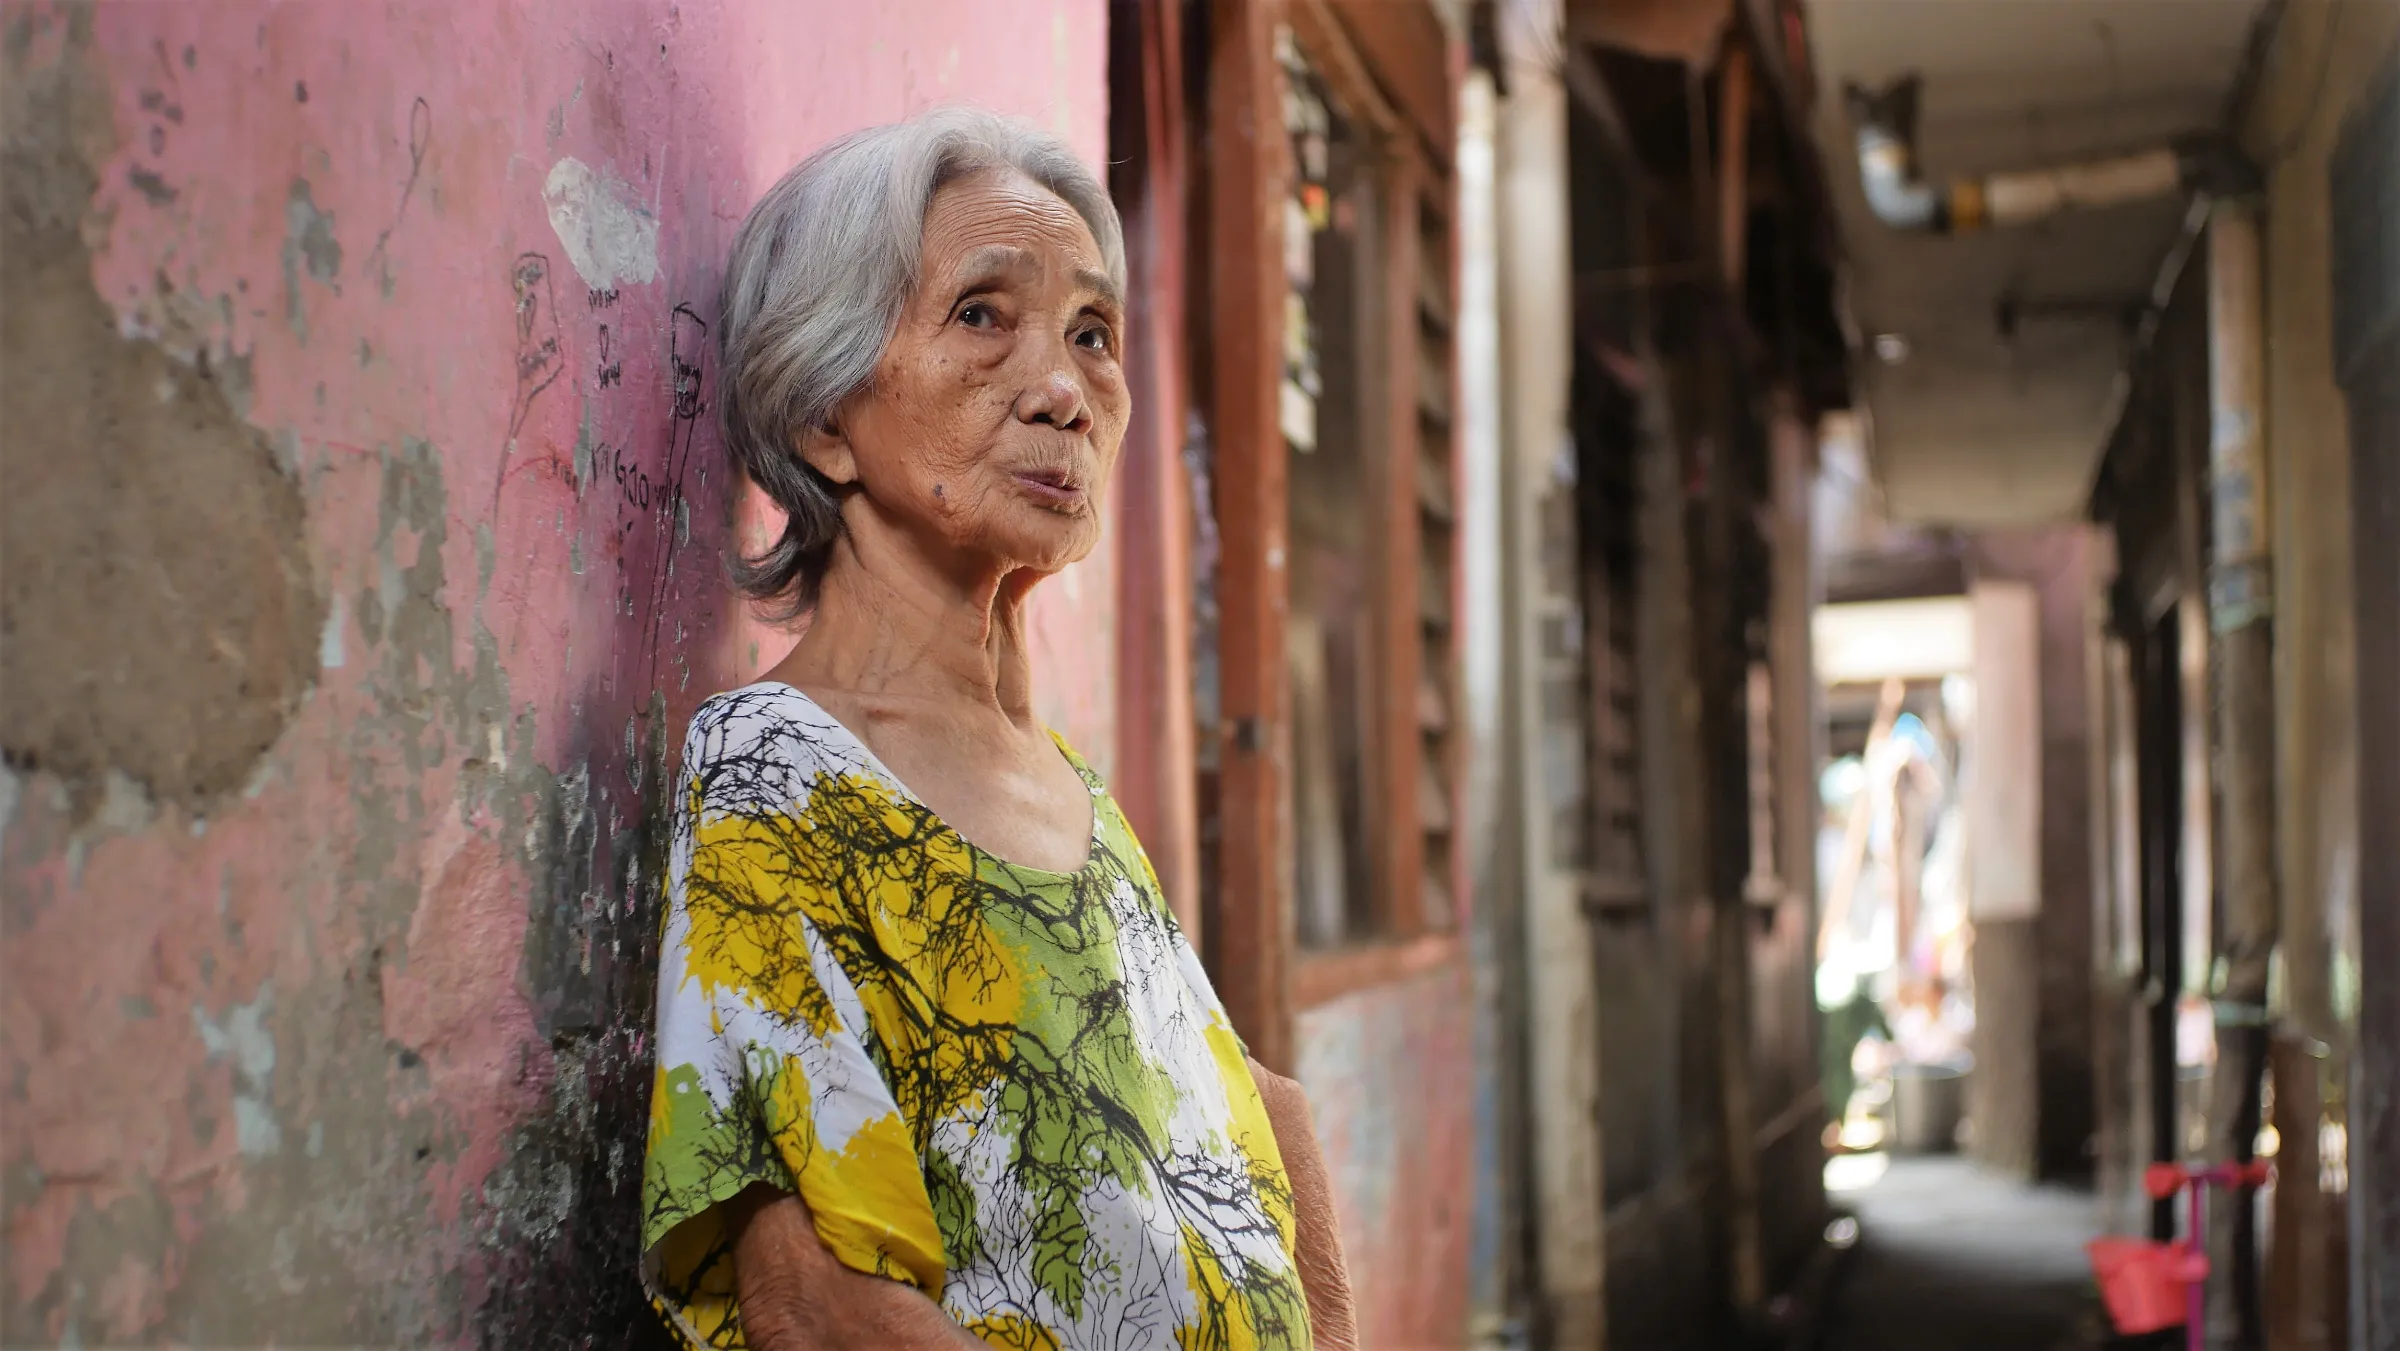 Napsiah, 77, in her home that she shares with nine others, in Pisangan Baru in Jakarta, Indonesia.